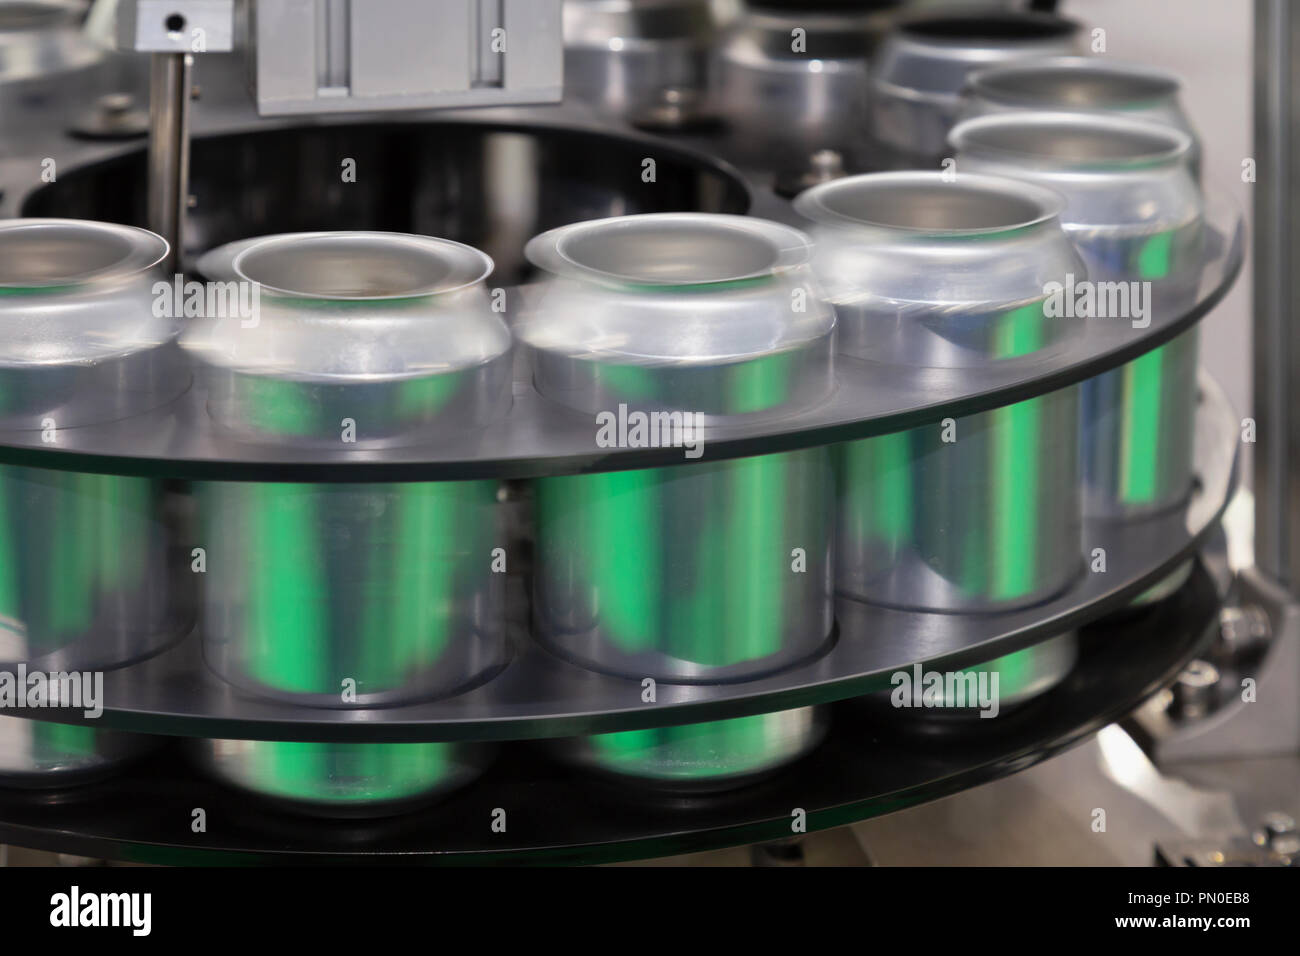 empty new aluminum cans for drink process are moving in factory line on conveyor belt machine at beverage manufacturing. food and beverage industrial  Stock Photo